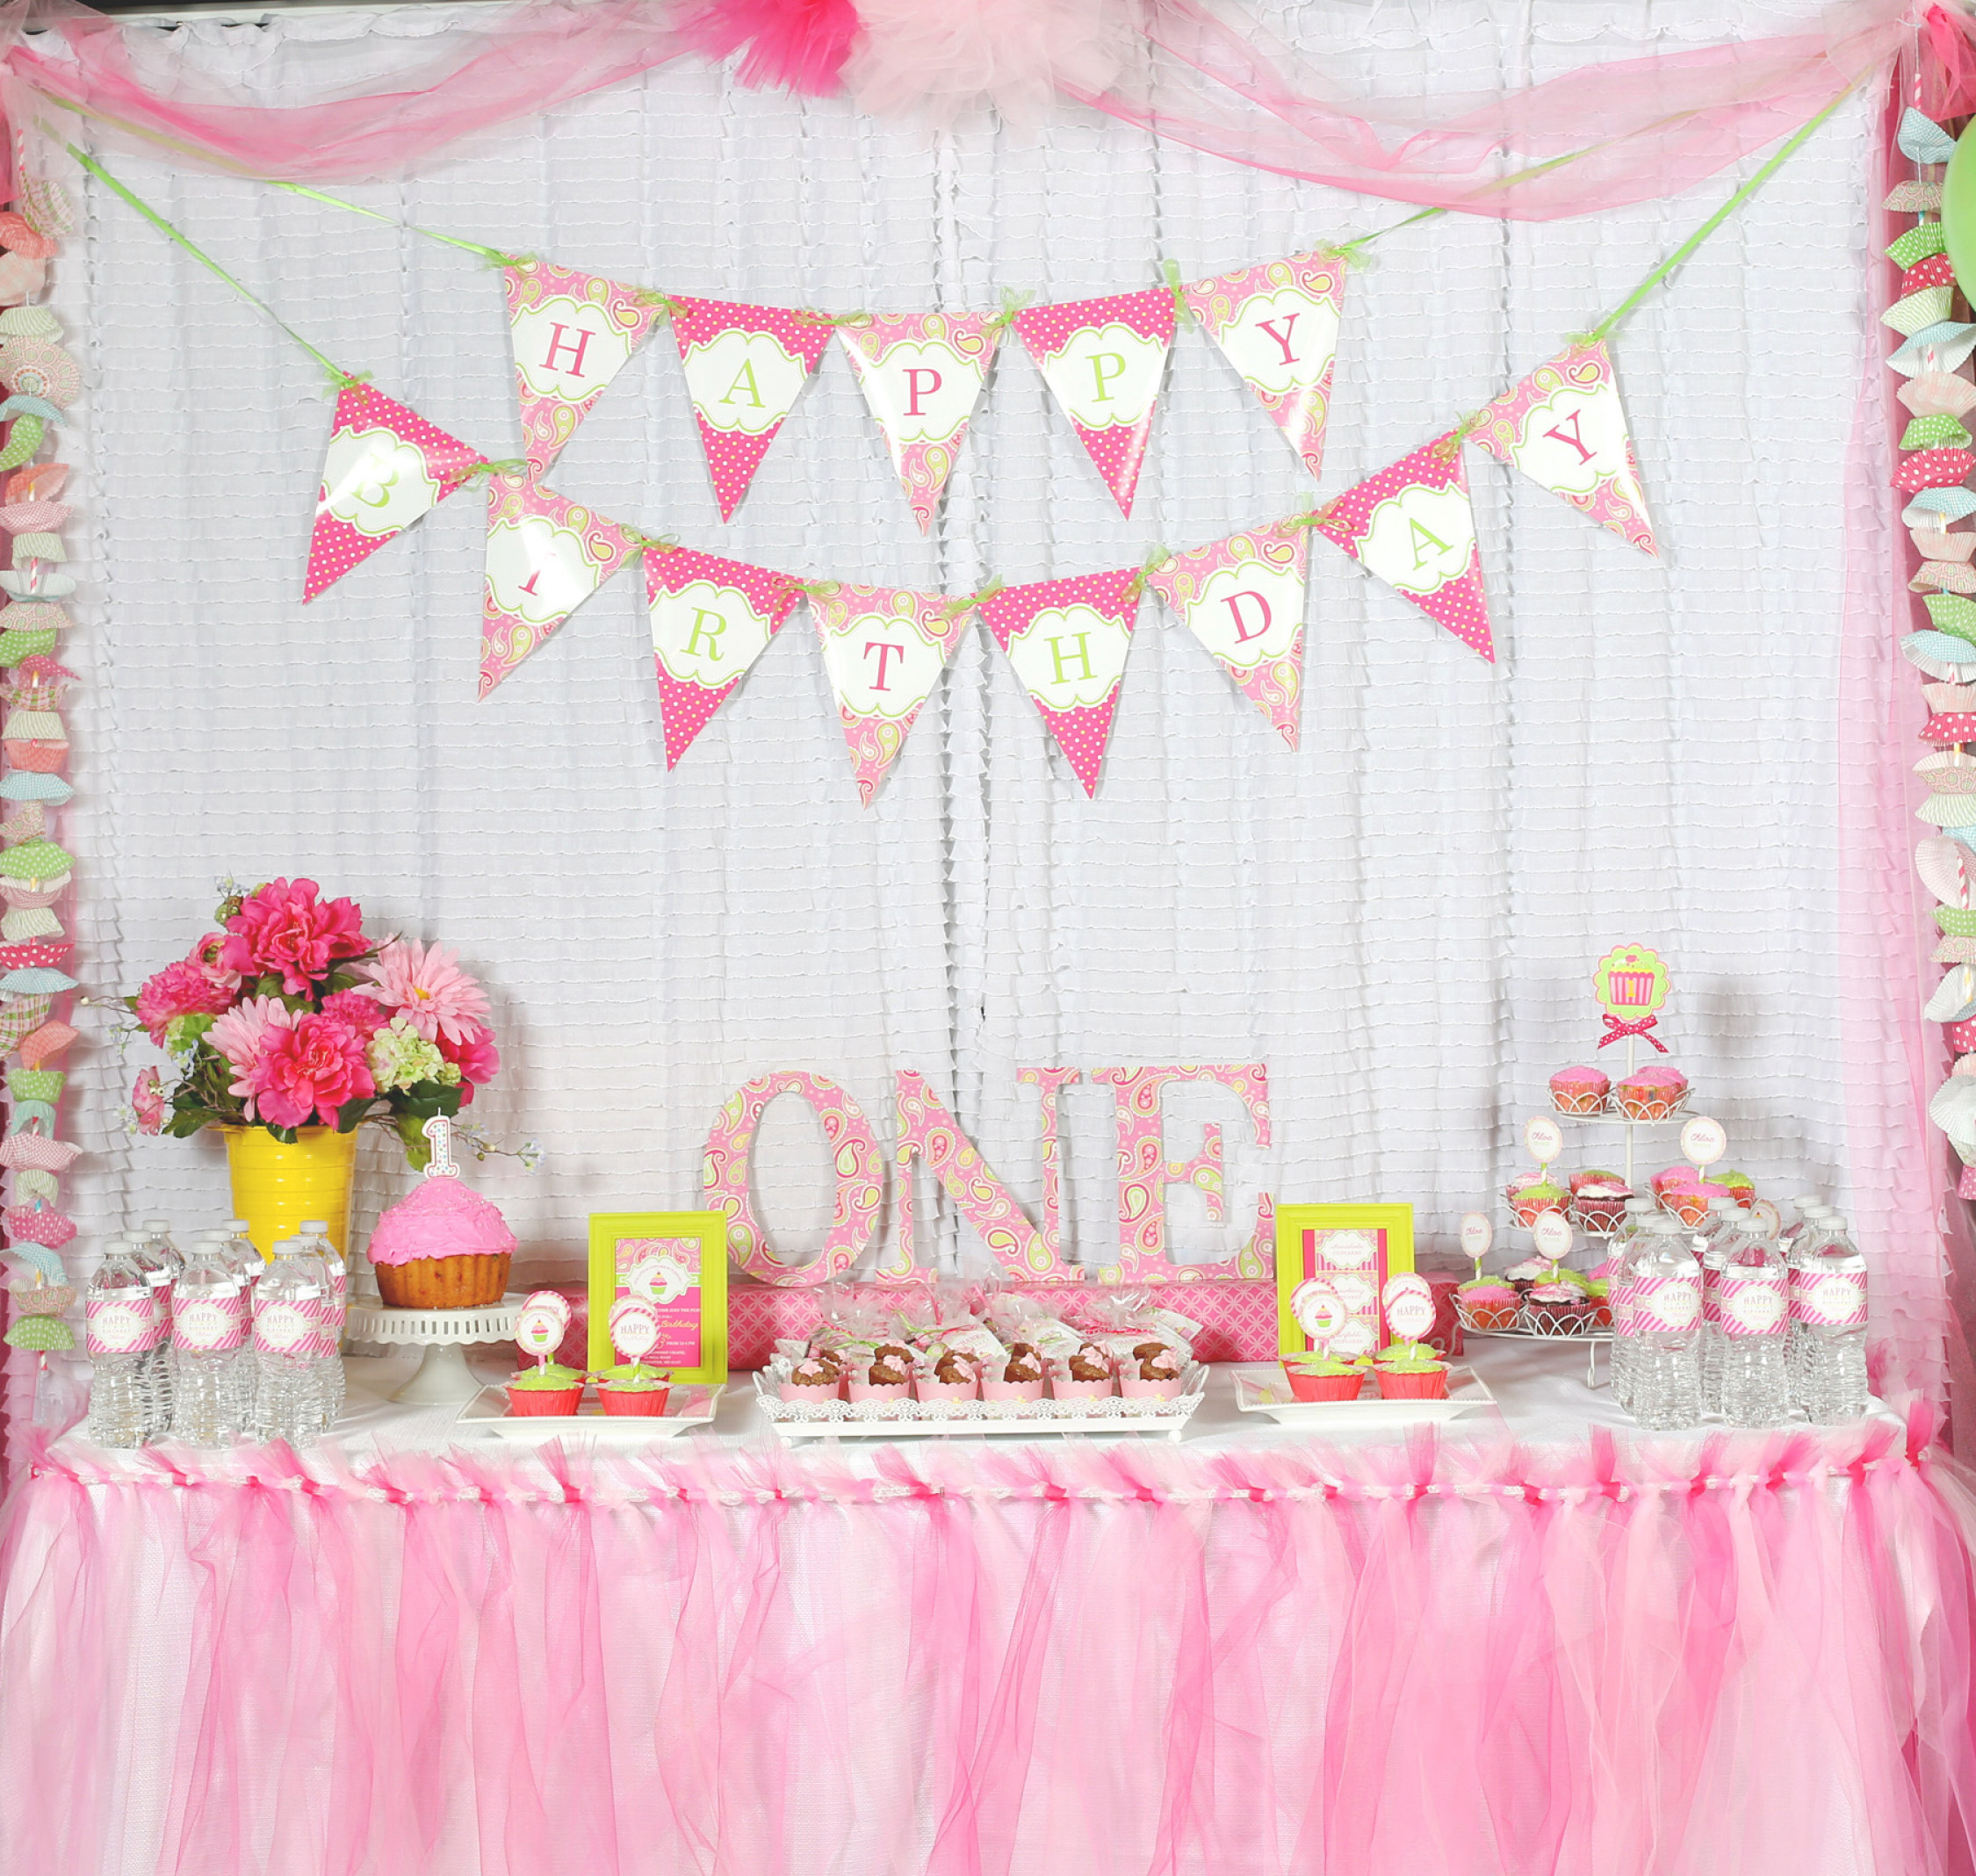 1st Birthday Decoration Ideas
 A Cupcake Themed 1st Birthday party with Paisley and Polka